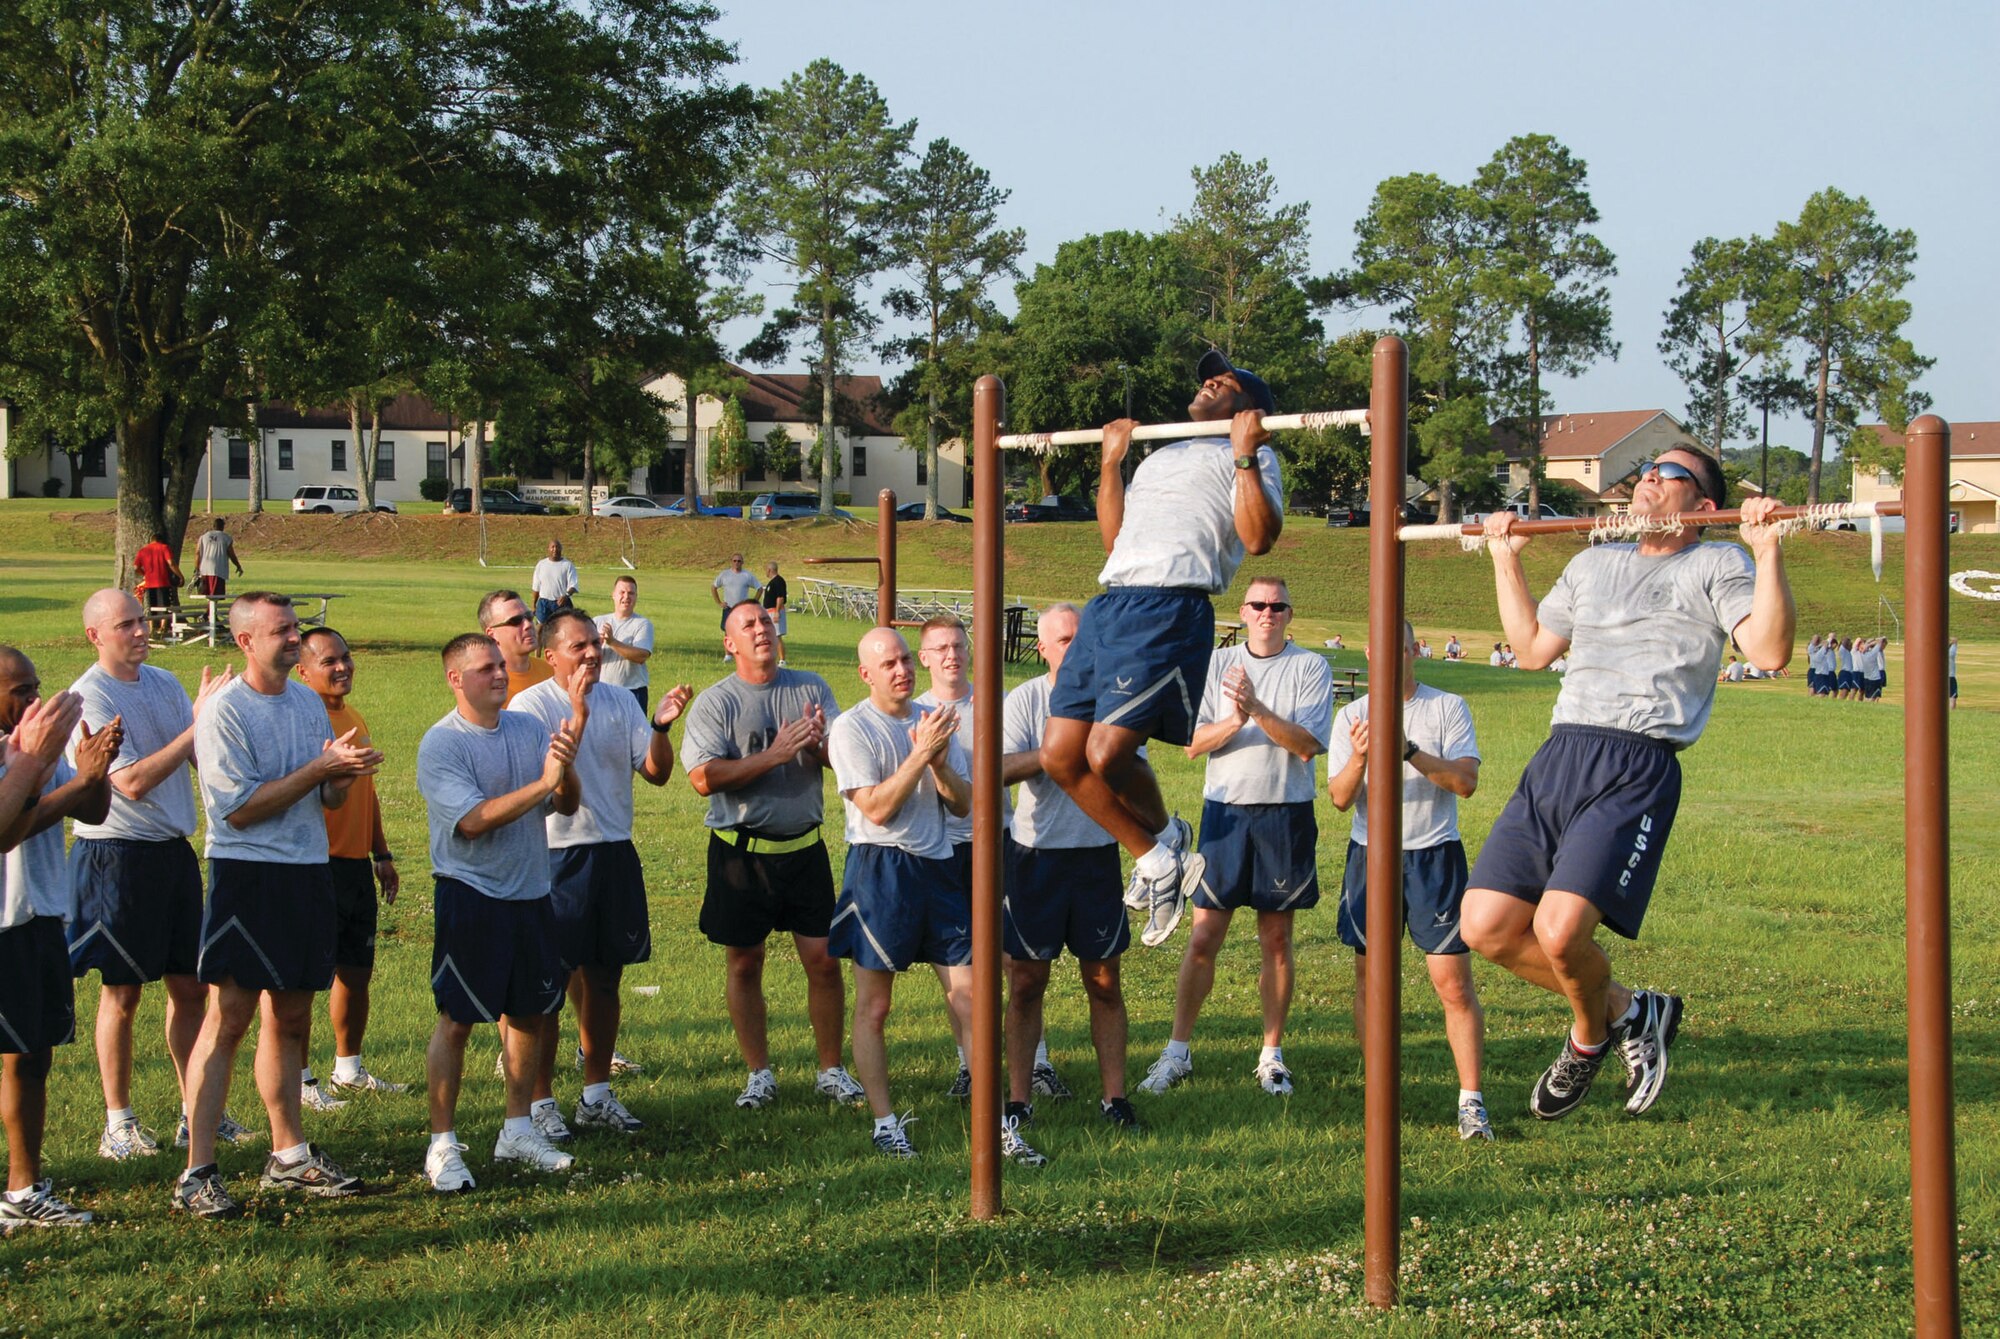 Airmen and "guardian" from "Ravens 3" at the Senior NCO Academy perform the pull-up exercise after a 3-mile run during fitness training as fellow students and instructors cheer them on. (U.S. Air Force photo/Bud Hancock) 